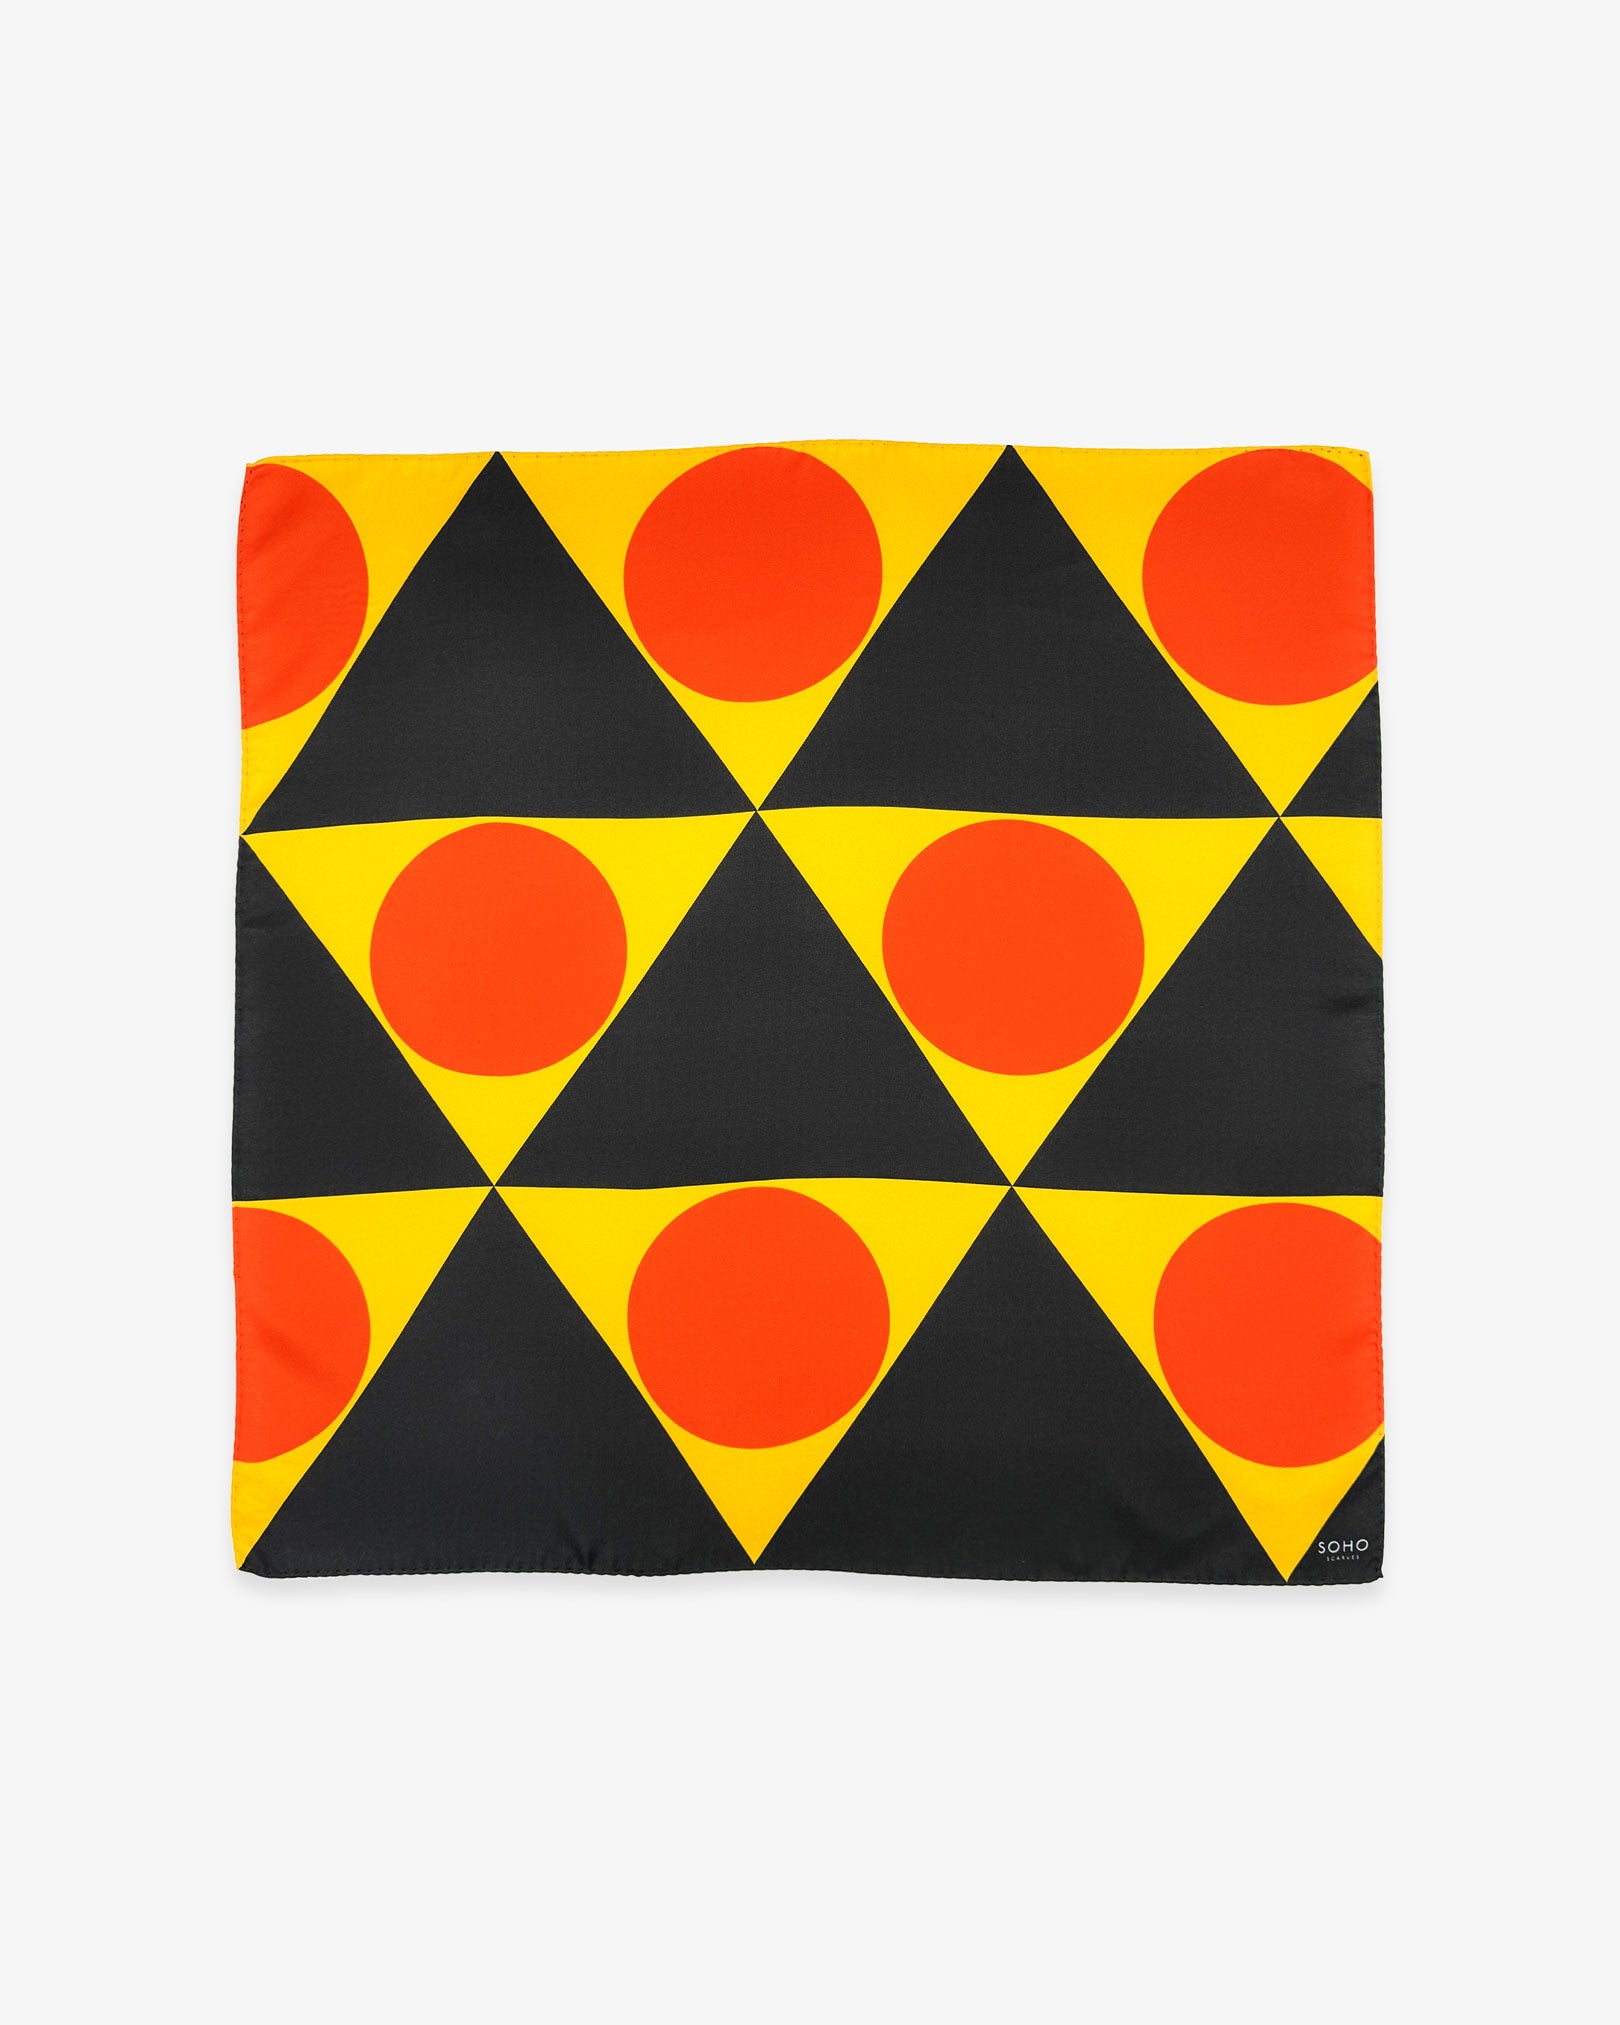 Fully unfolded 'Dresden' silk pocket square, showing the triangular shapes of yellow and dark grey with orange discs.